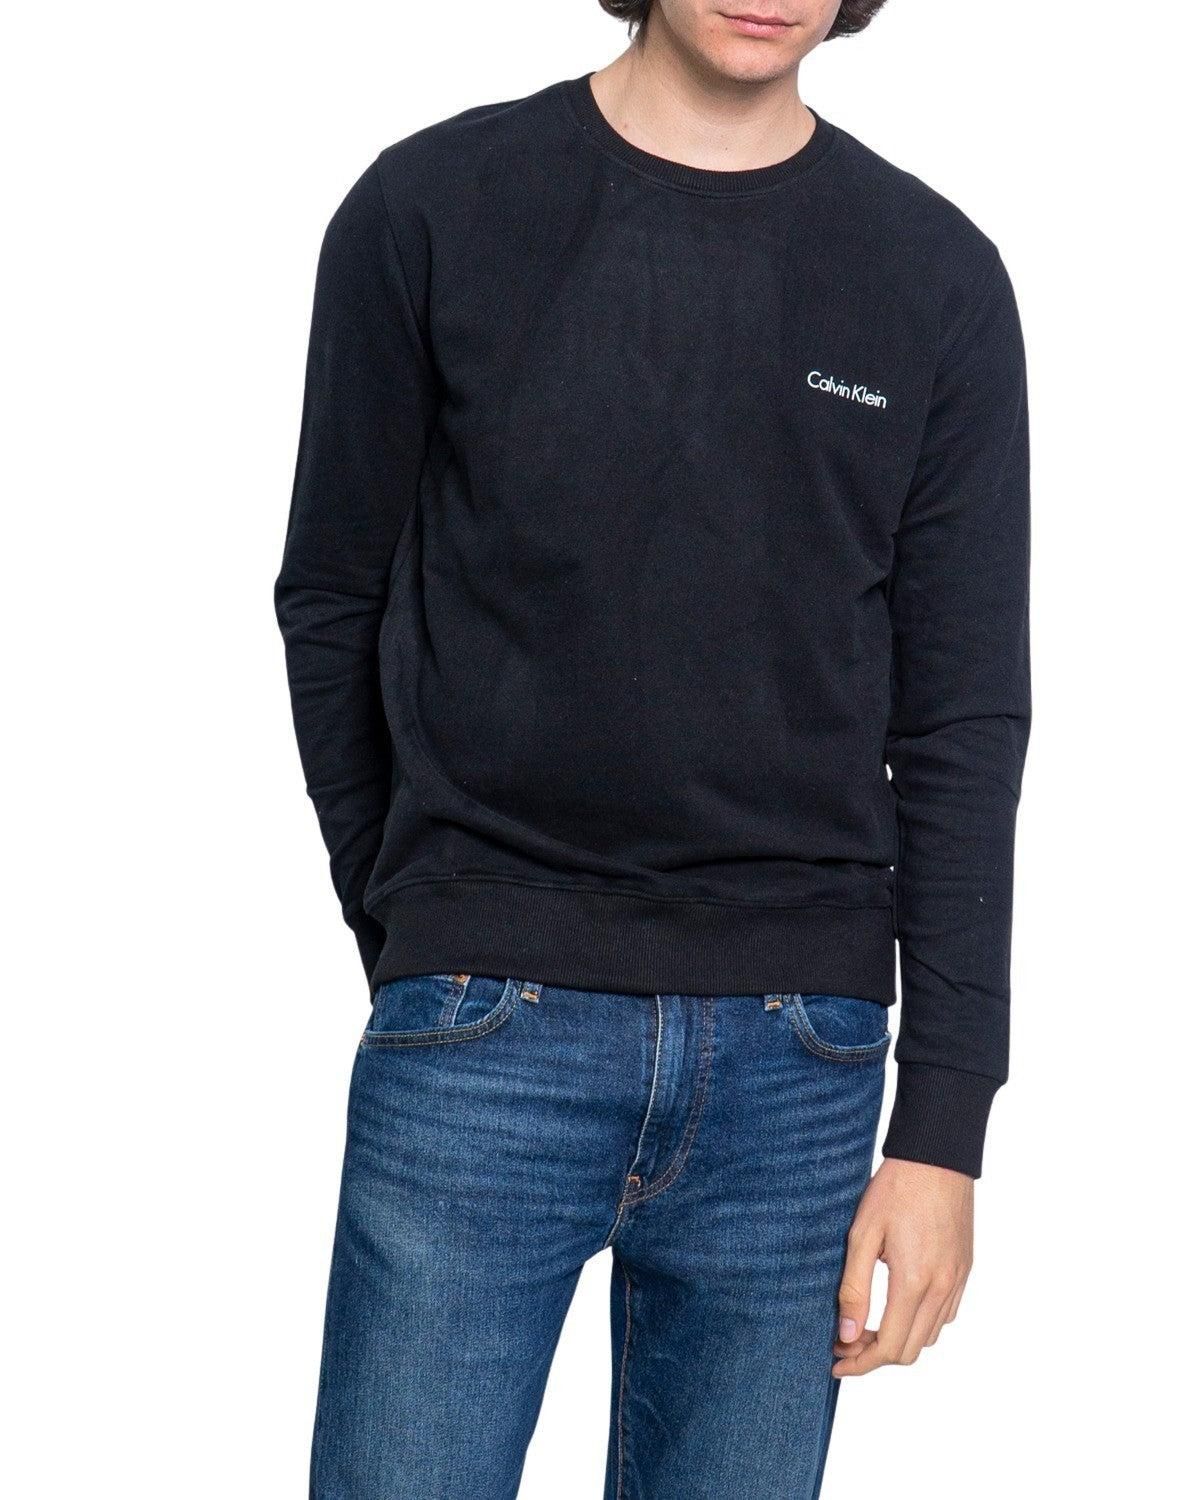 Brand: Calvin Klein Jeans
Gender: Men
Type: Sweatshirts
Season: Spring/Summer

PRODUCT DETAIL
• Color: black
• Pattern: plain
• Fastening: slip on
• Sleeves: long
• Neckline: round neck

COMPOSITION AND MATERIAL
• Composition: -100% cotton 
•  Washing: machine wash at 30°